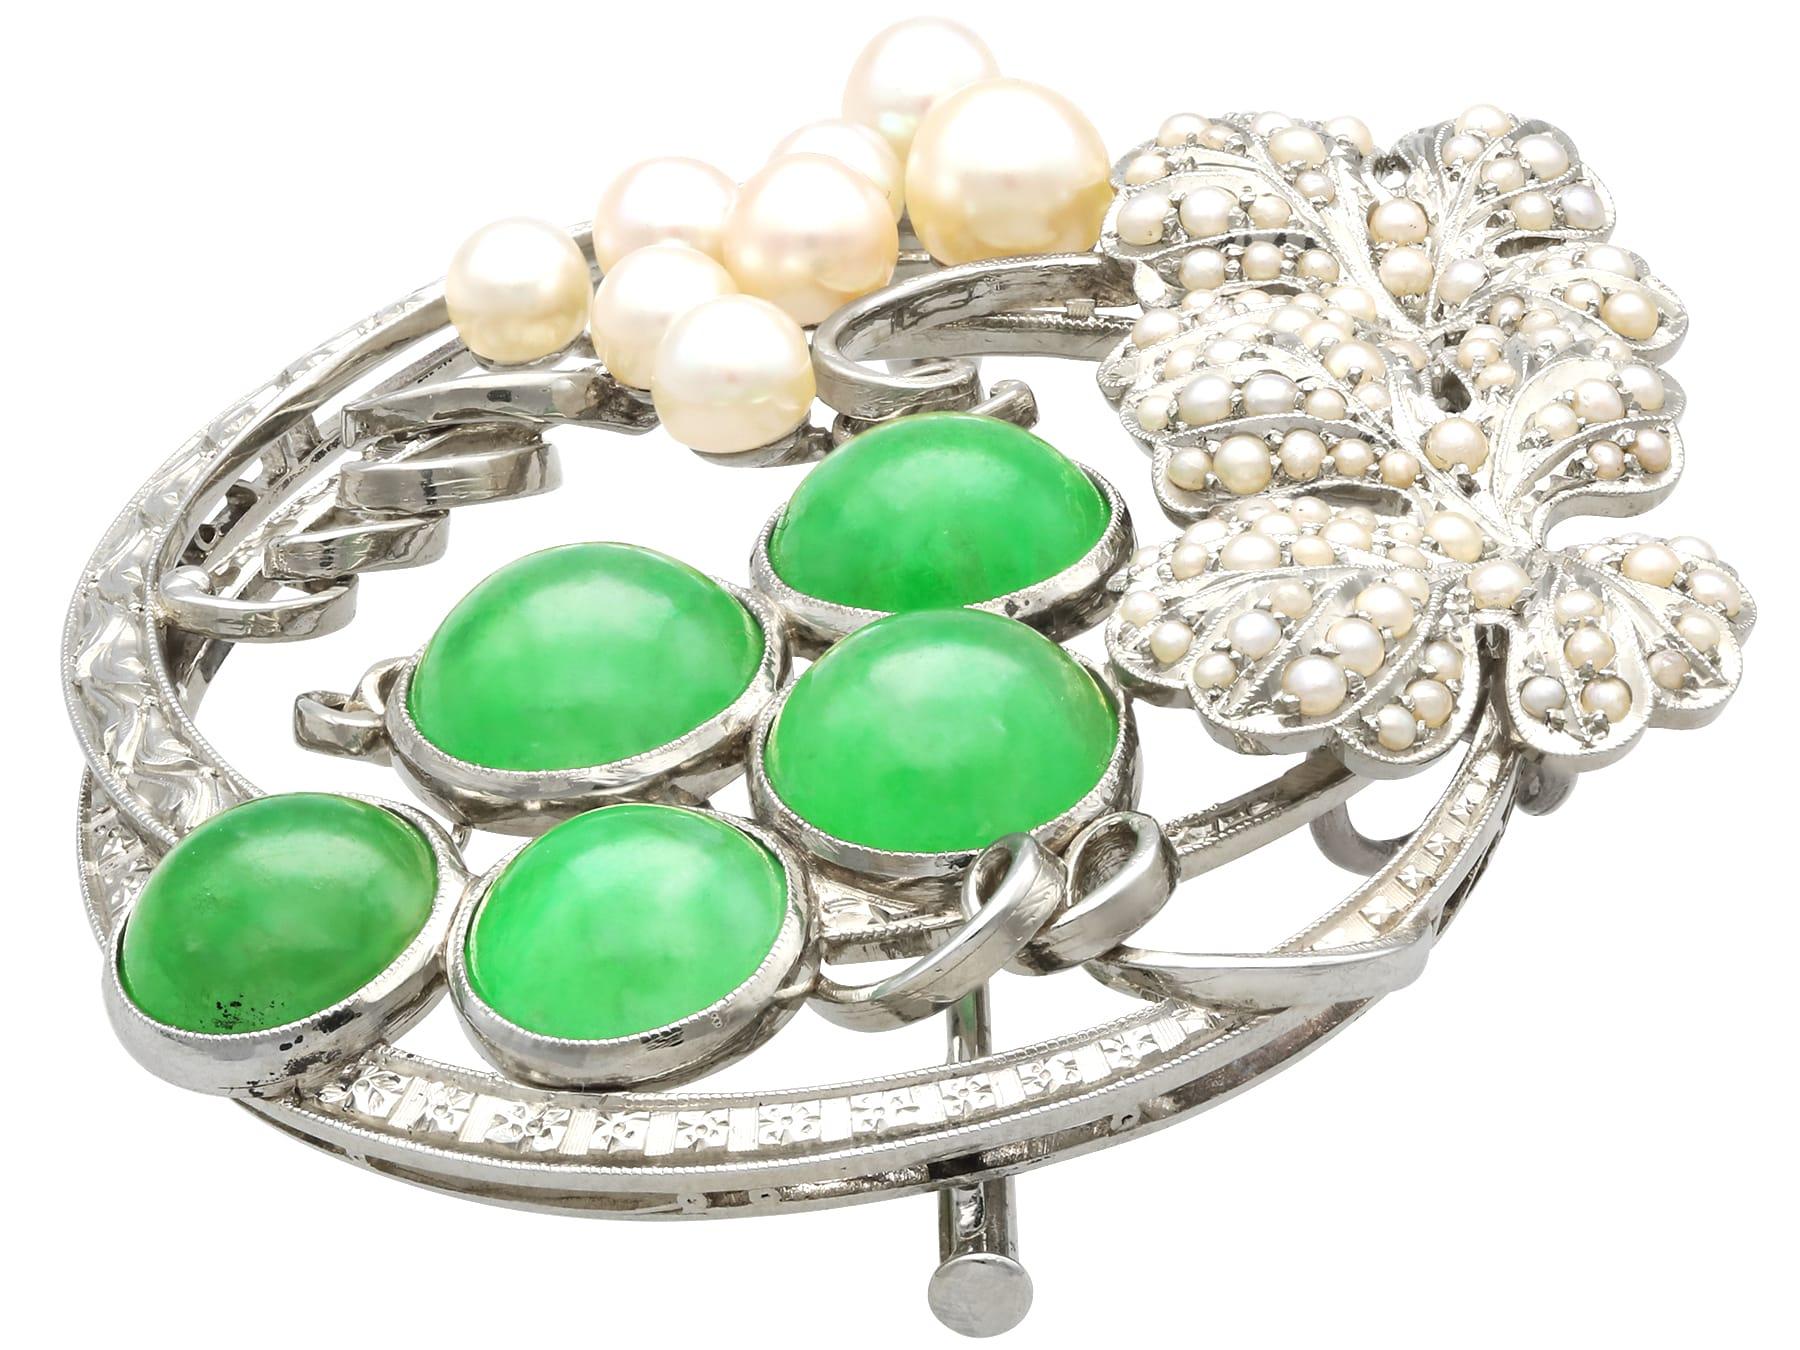 Vintage 8.85Ct Chrysoprase and Seed Pearl, 18k White Gold Brooch/Pendant  In Excellent Condition For Sale In Jesmond, Newcastle Upon Tyne